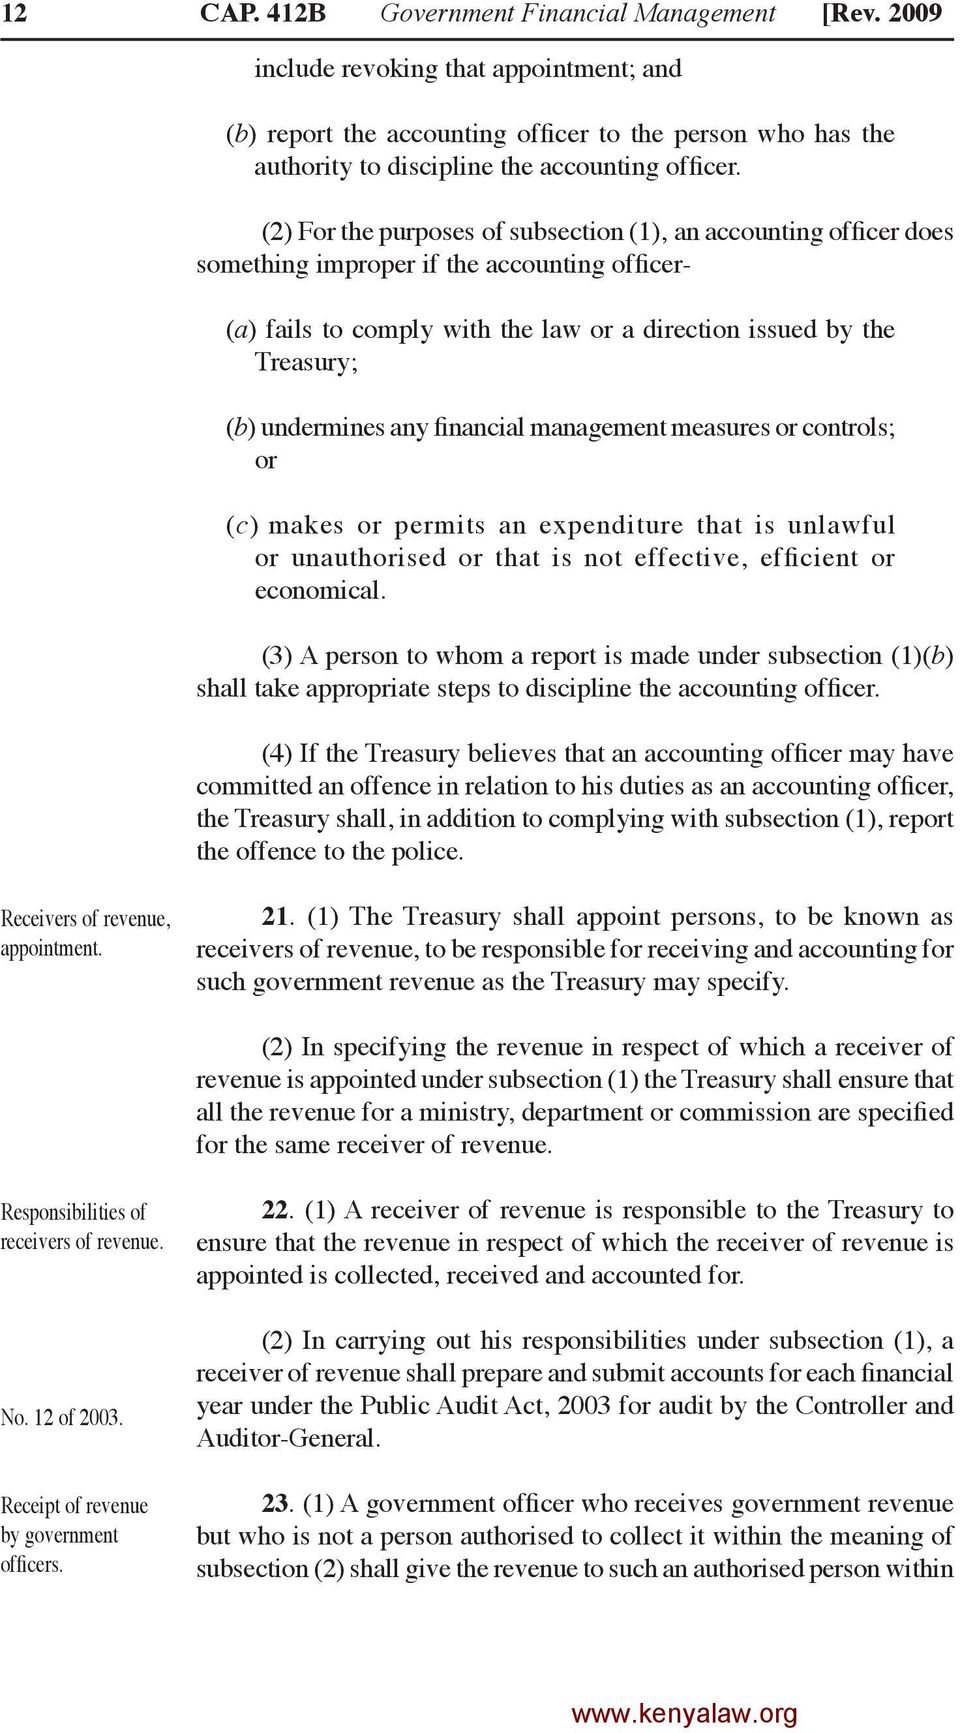 (2) For the purposes of subsection (1), an accounting officer does something improper if the accounting officer- (a) fails to comply with the law or a direction issued by the Treasury; (b) undermines